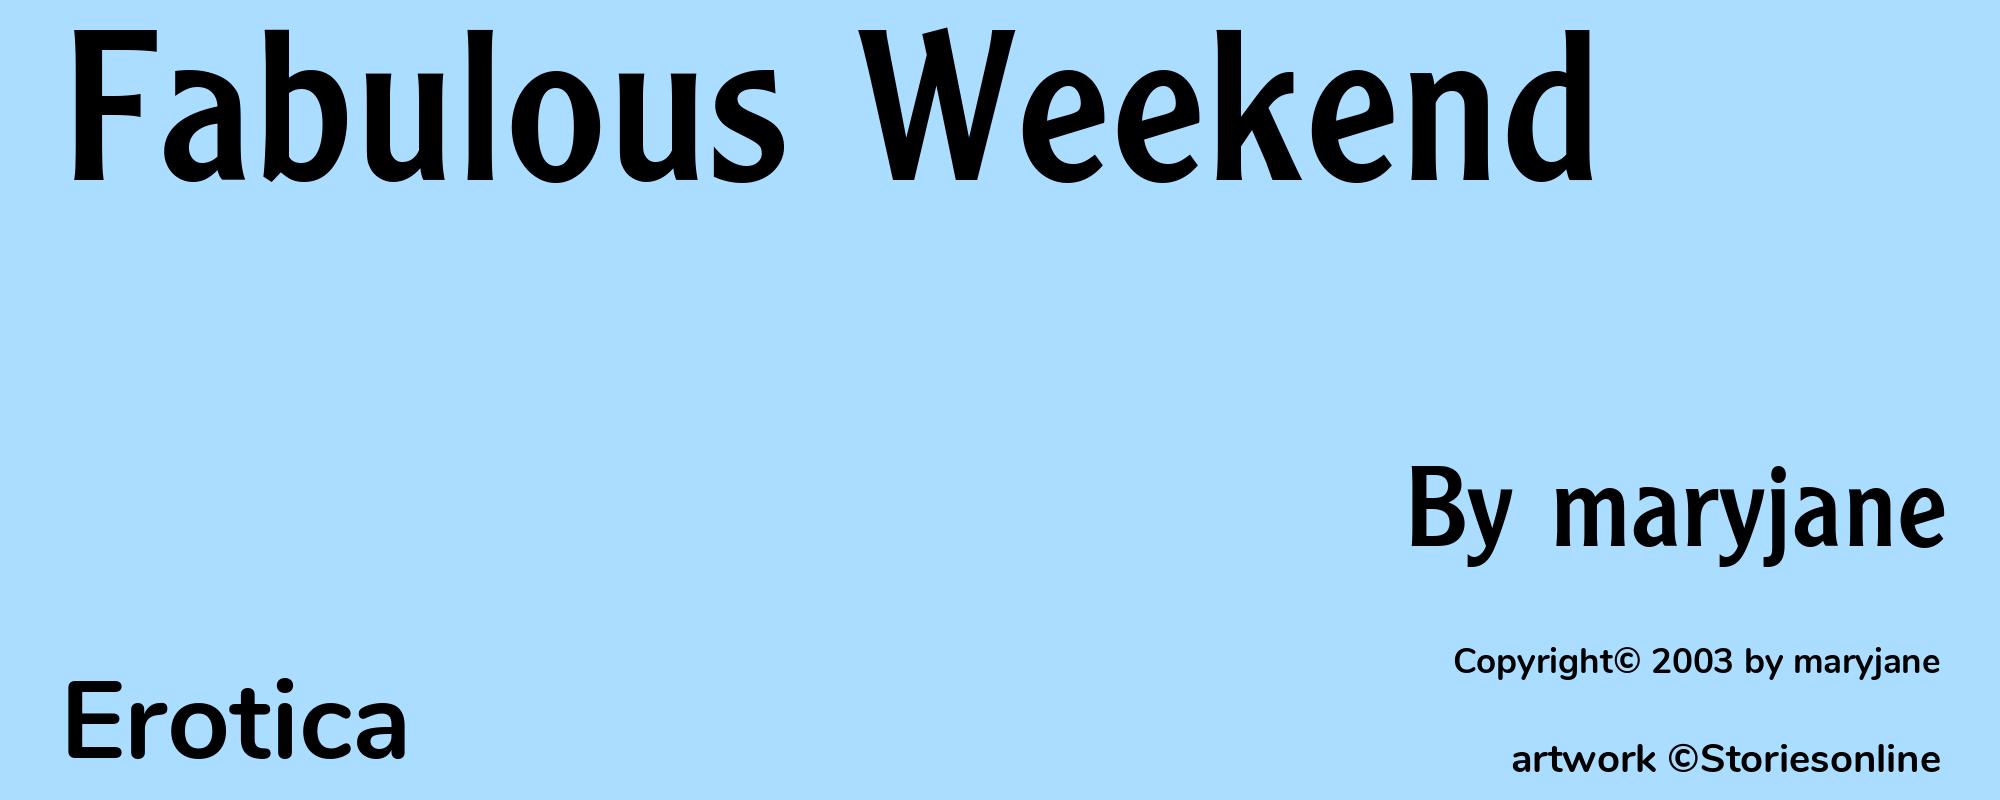 Fabulous Weekend - Cover